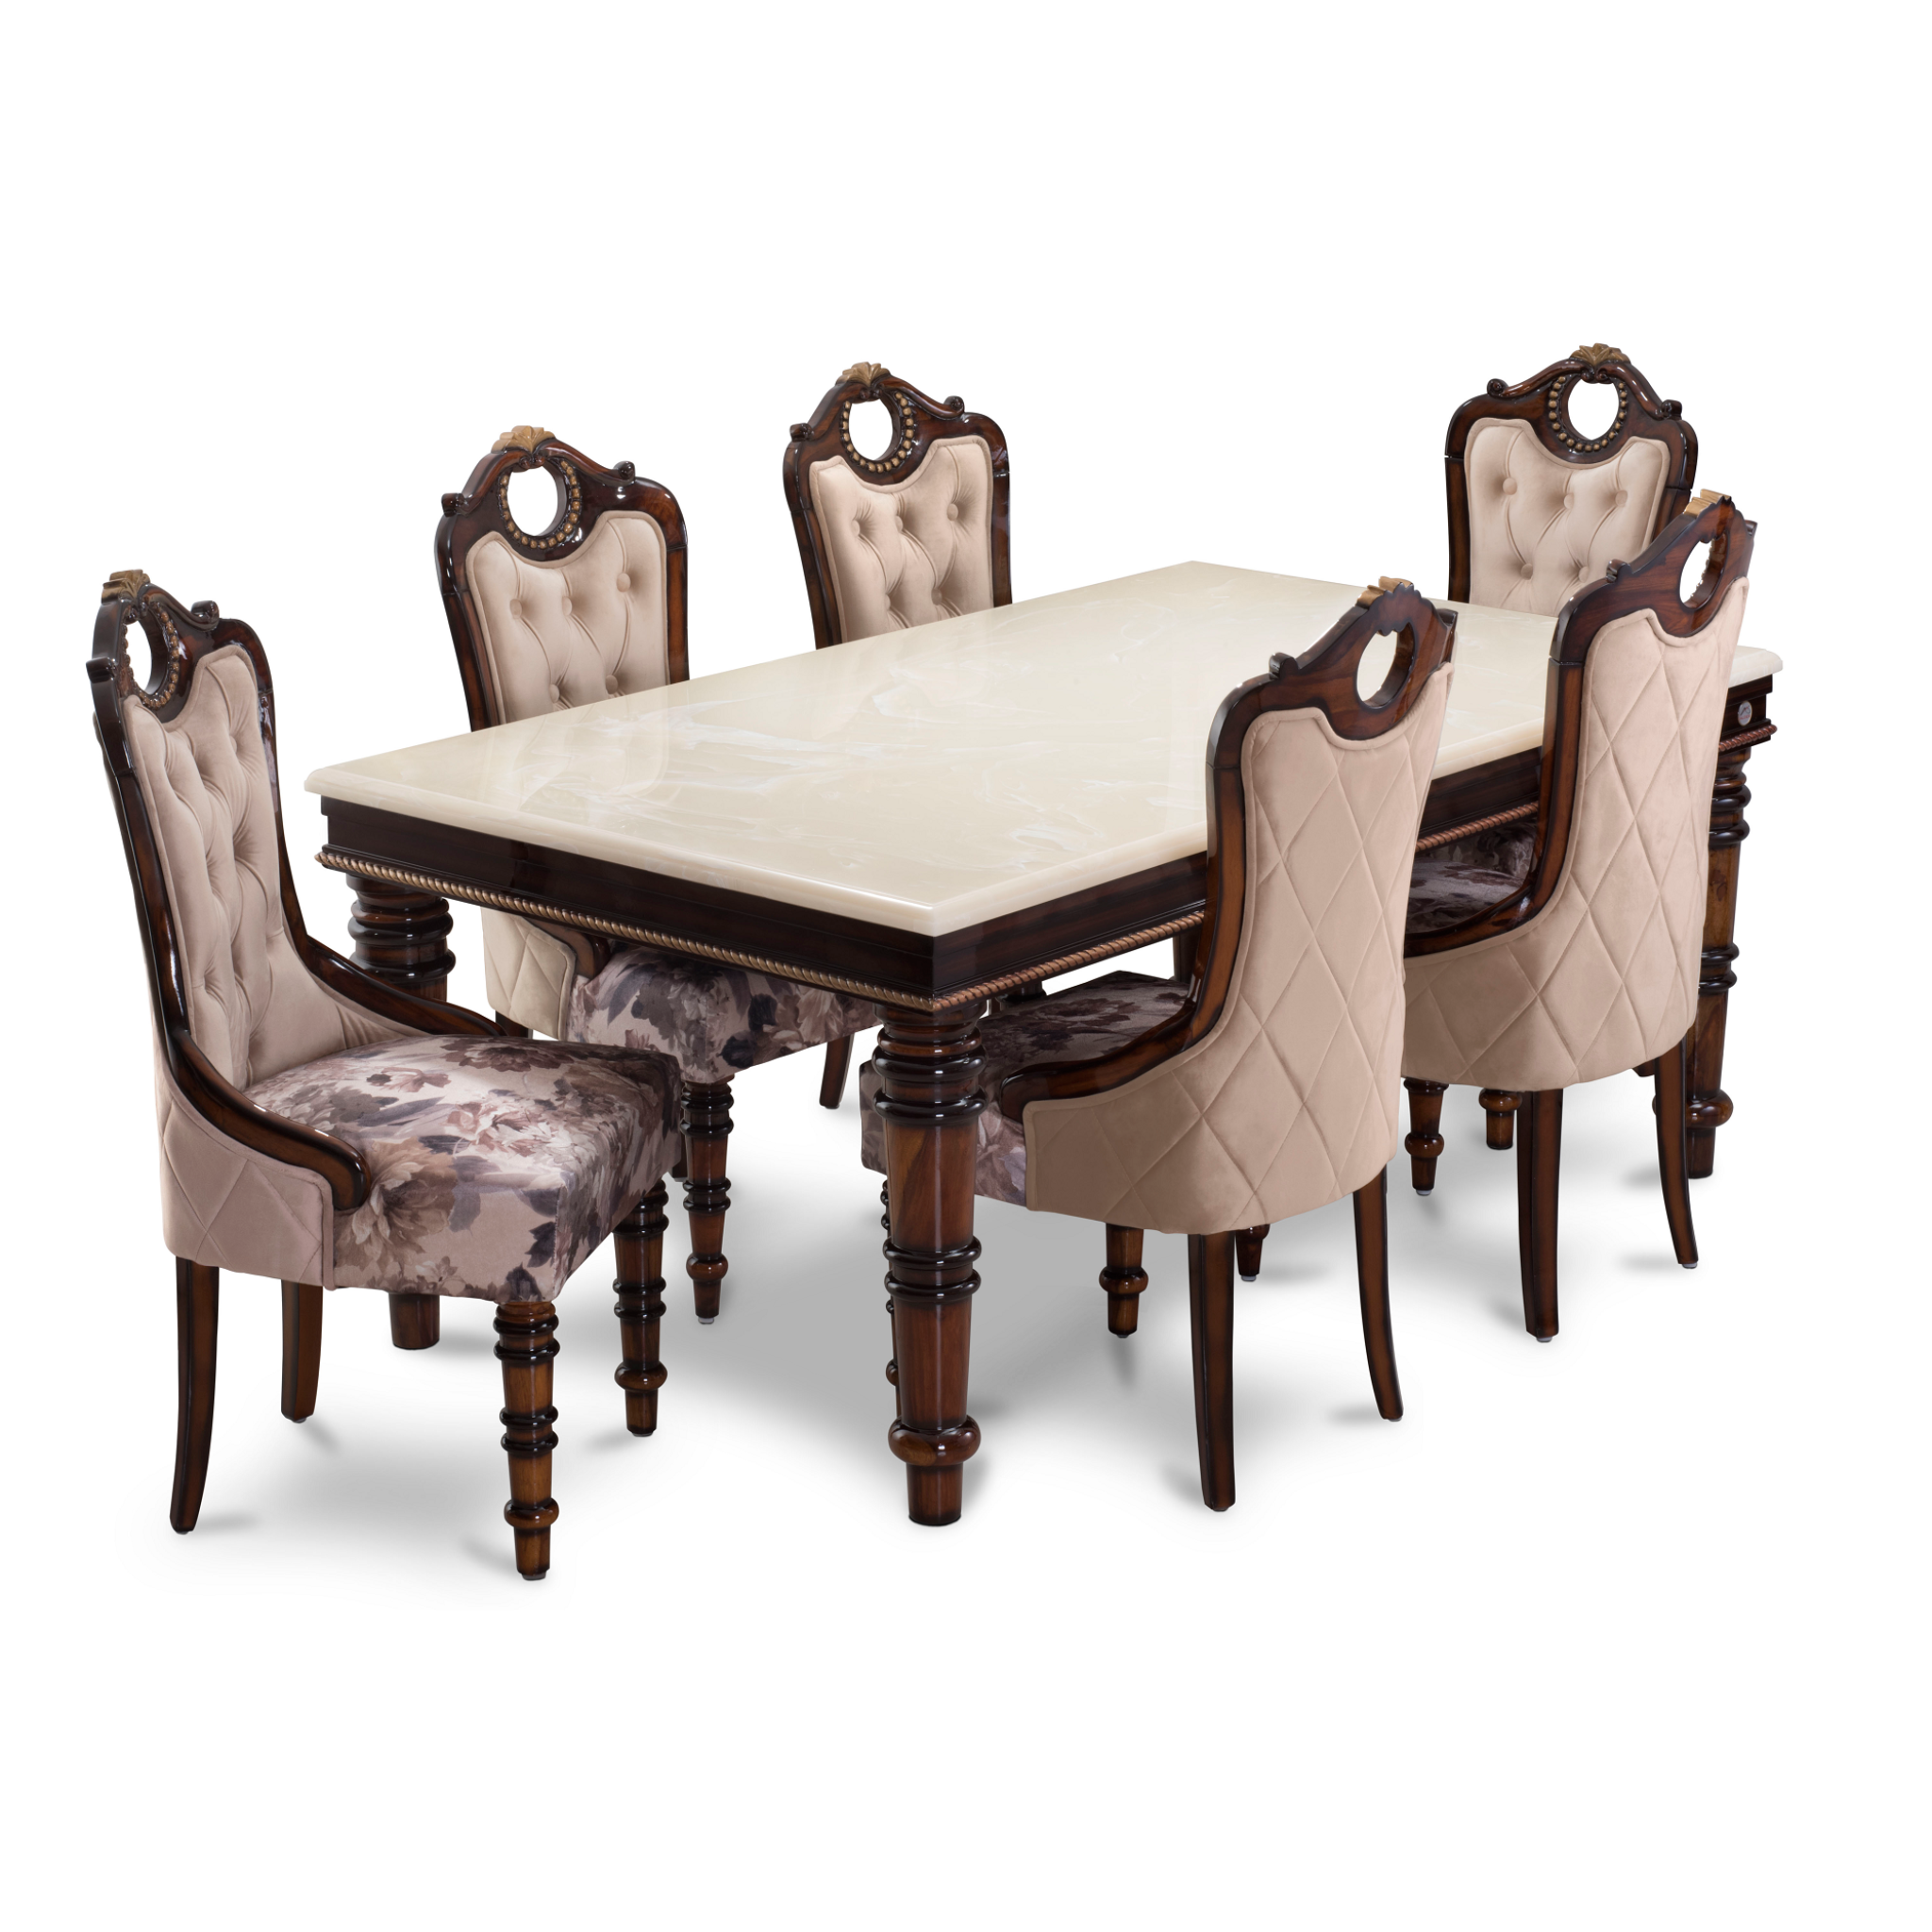 Athens Dining Table with Chair